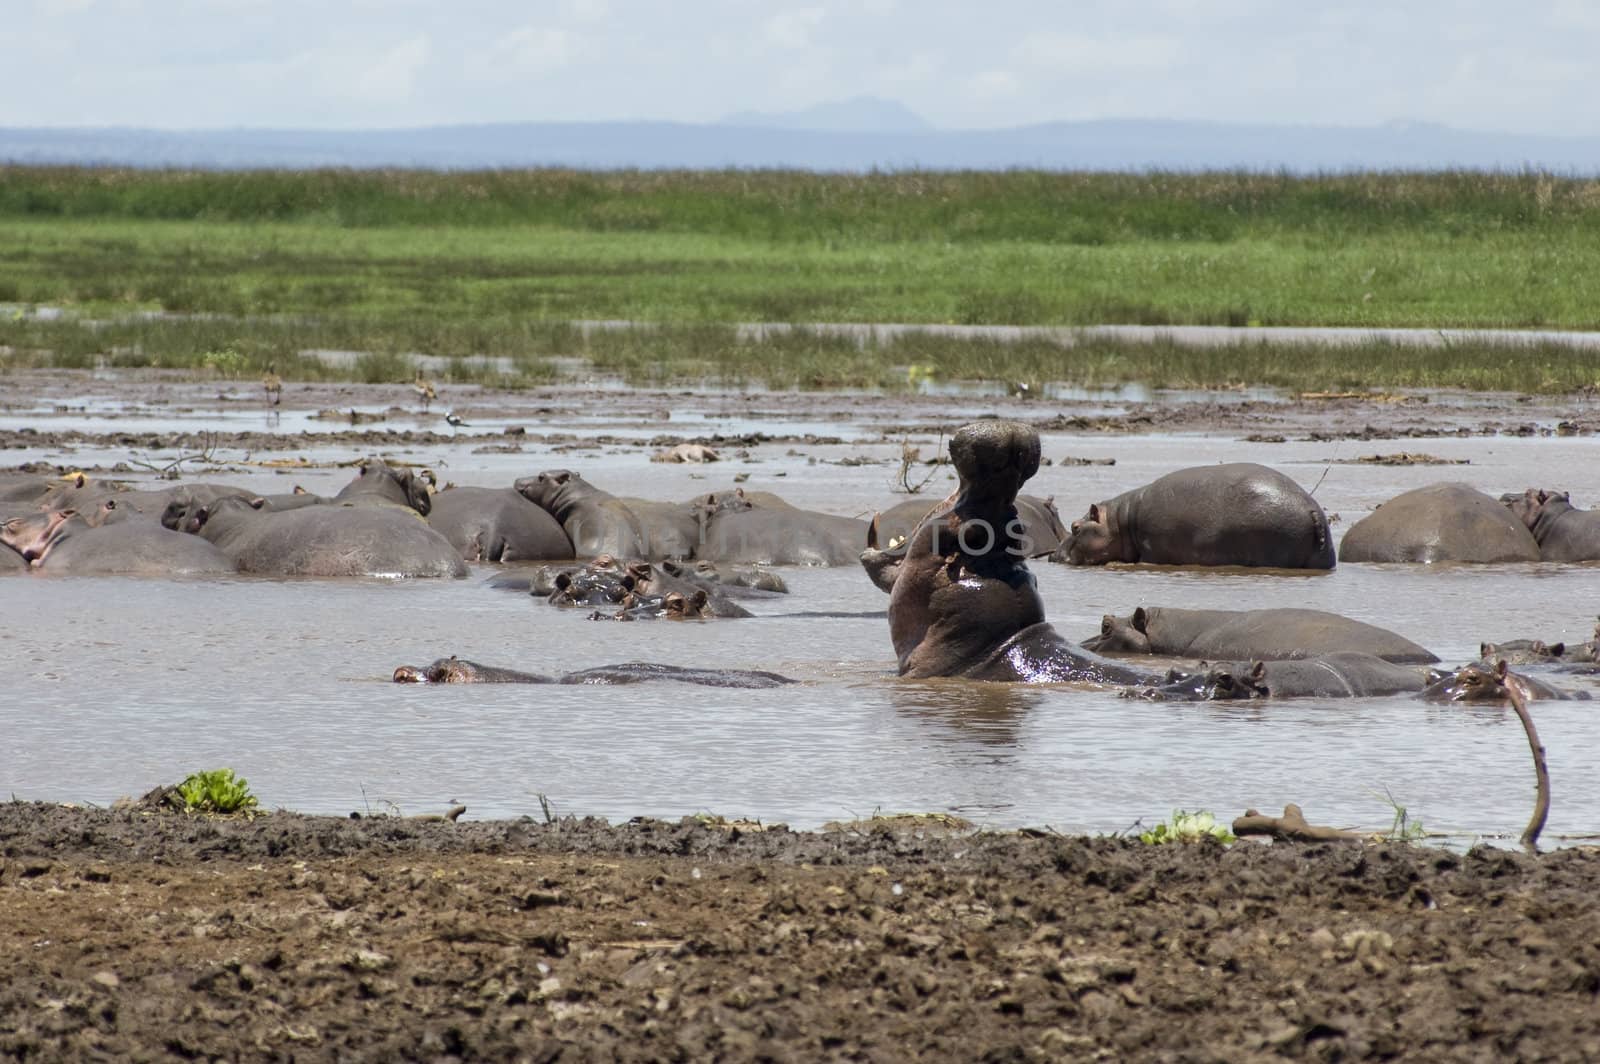 Hippo in the pool in the Lake Manyara National Park - Best of Tanzania